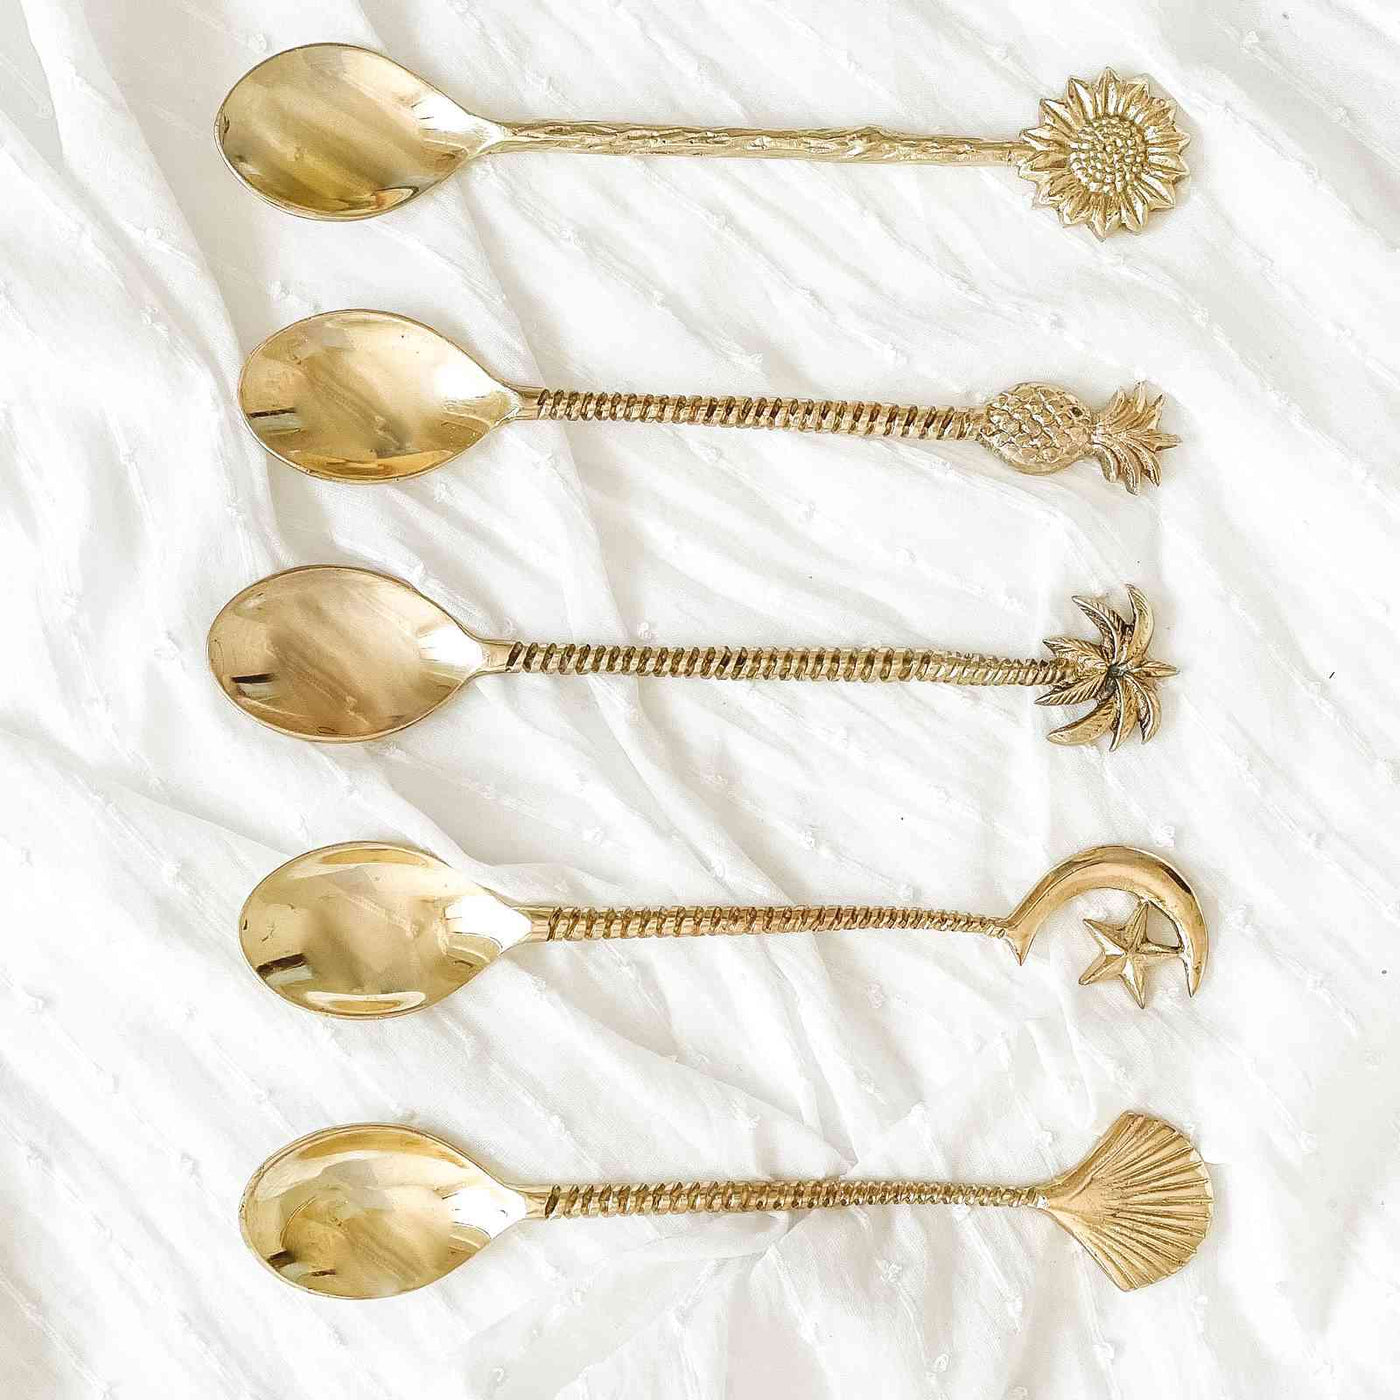 Decorative Polished Brass Serving Spoon